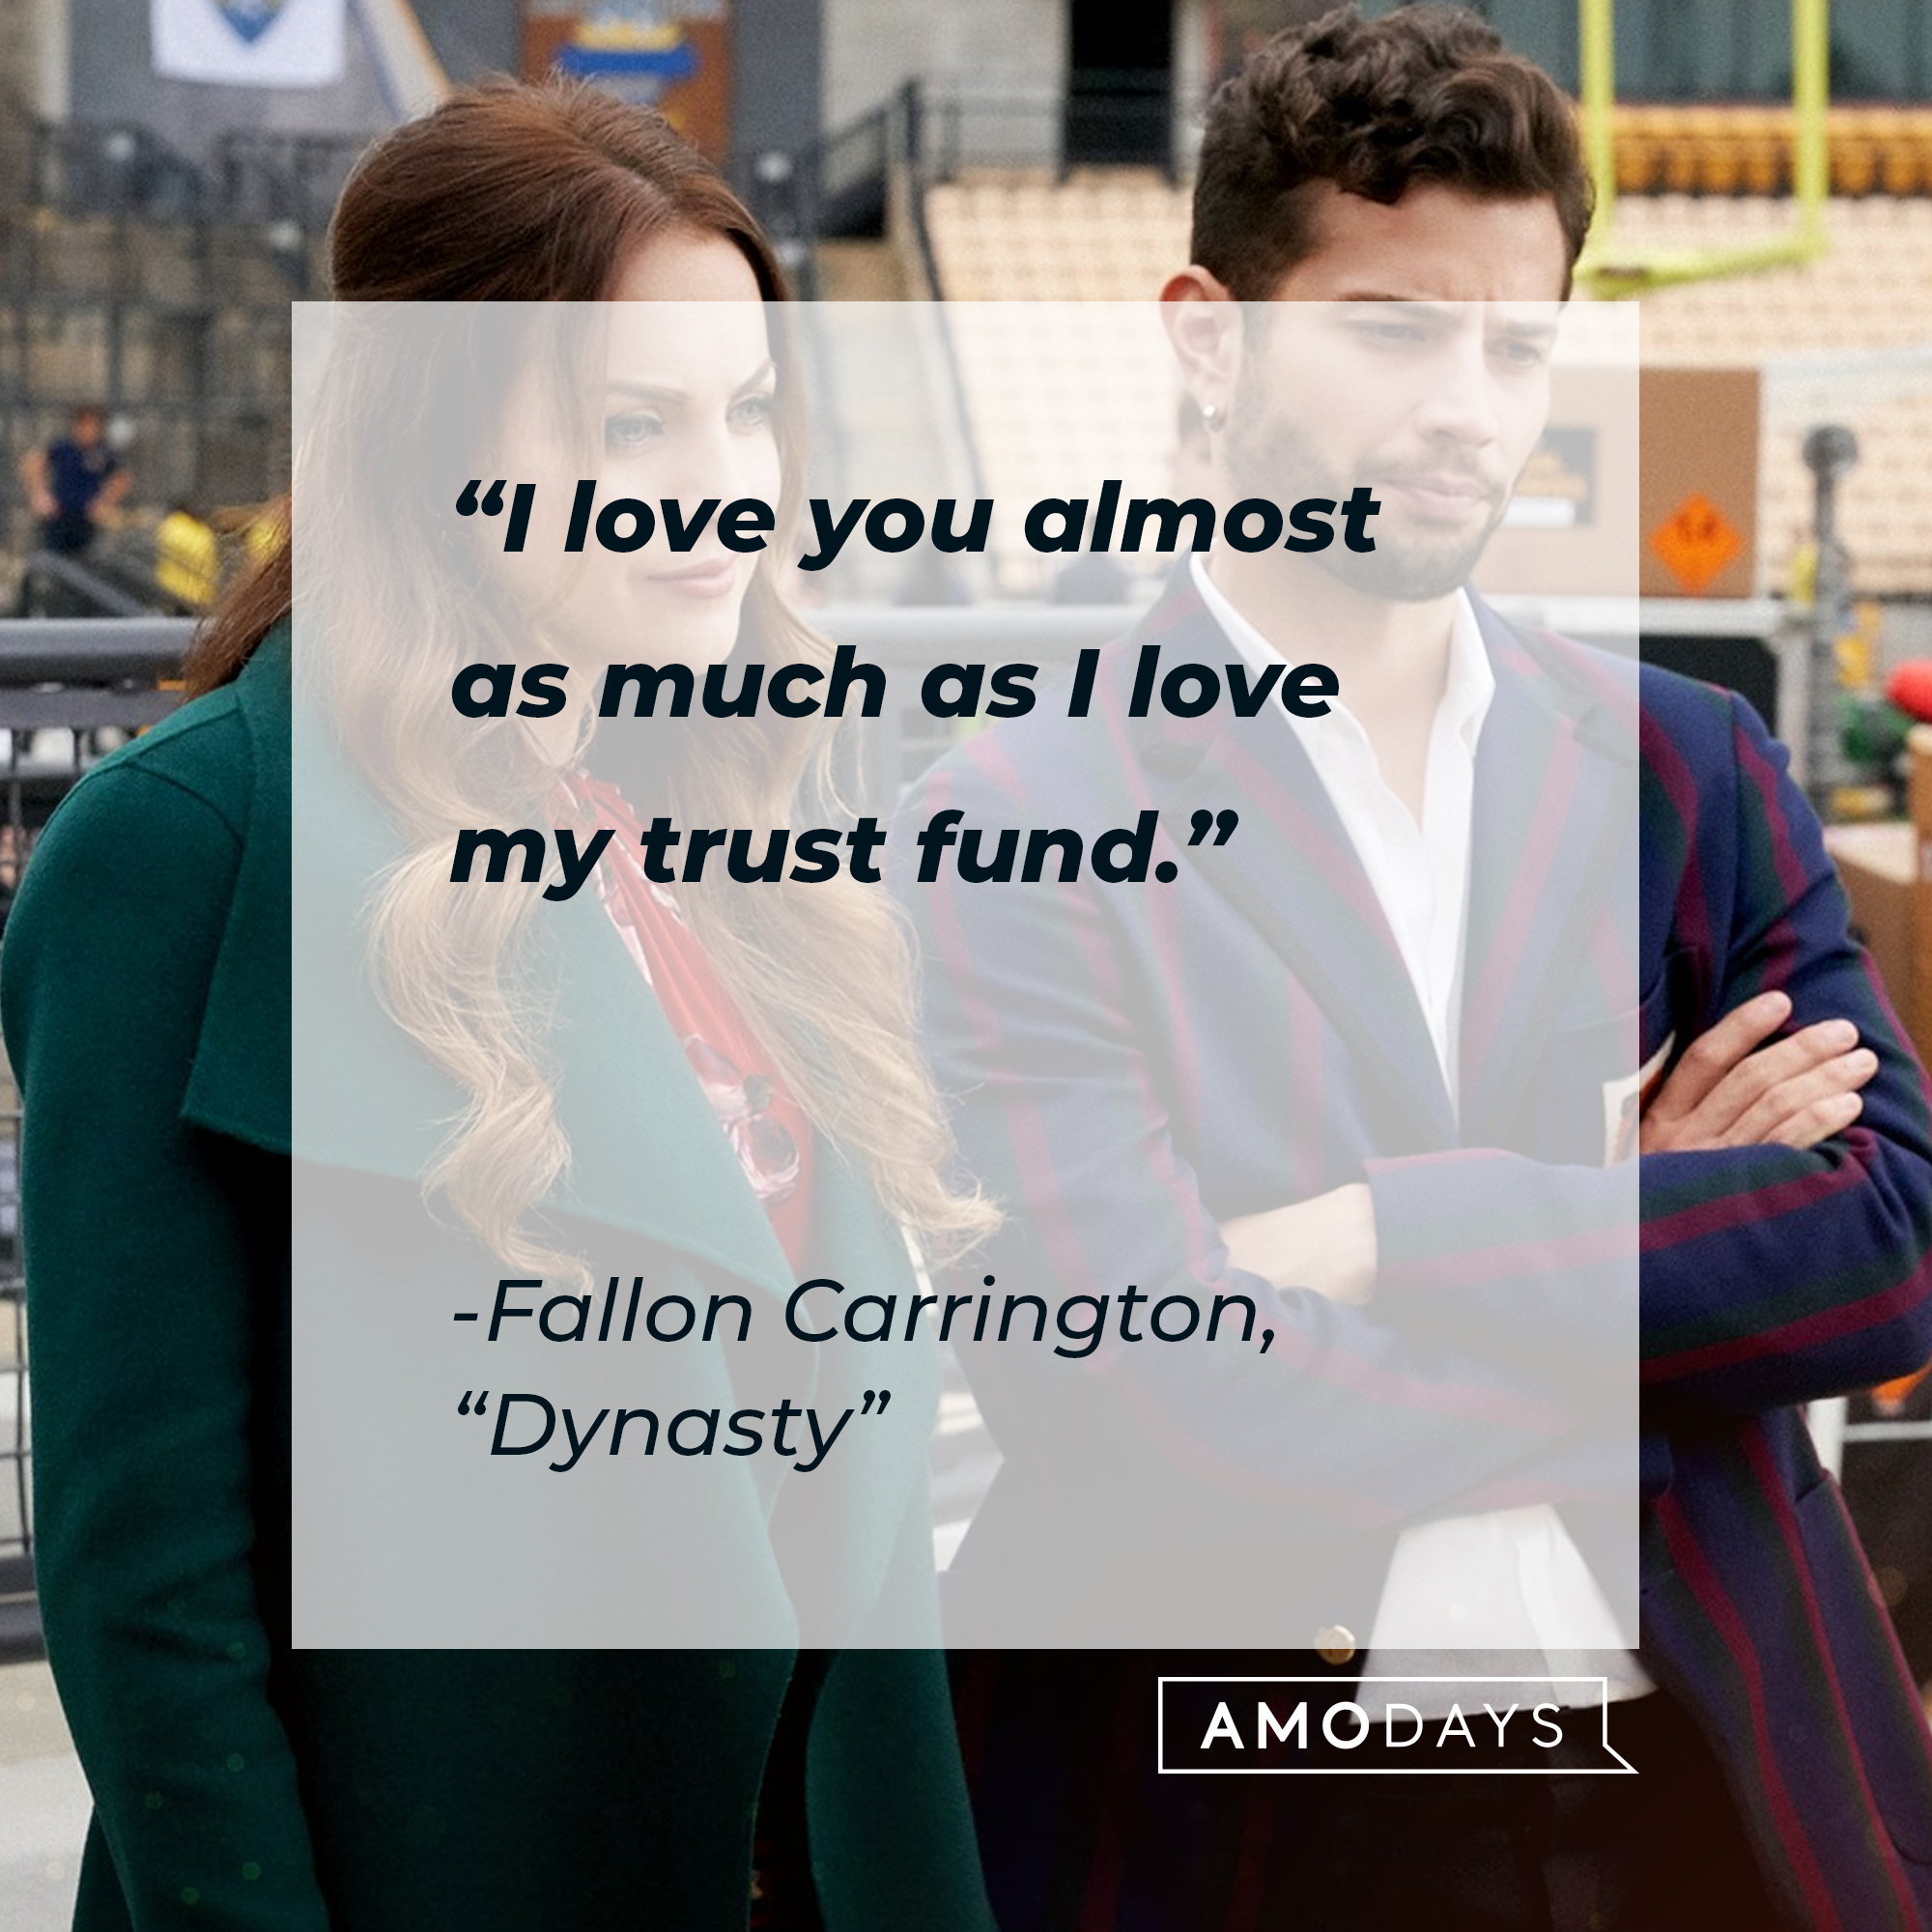 Fallon Carrington’s quote from “Dynasty”: “I love you almost as much as I love my trust fund.” | Source: facebook.com/DynastyOnTheCW